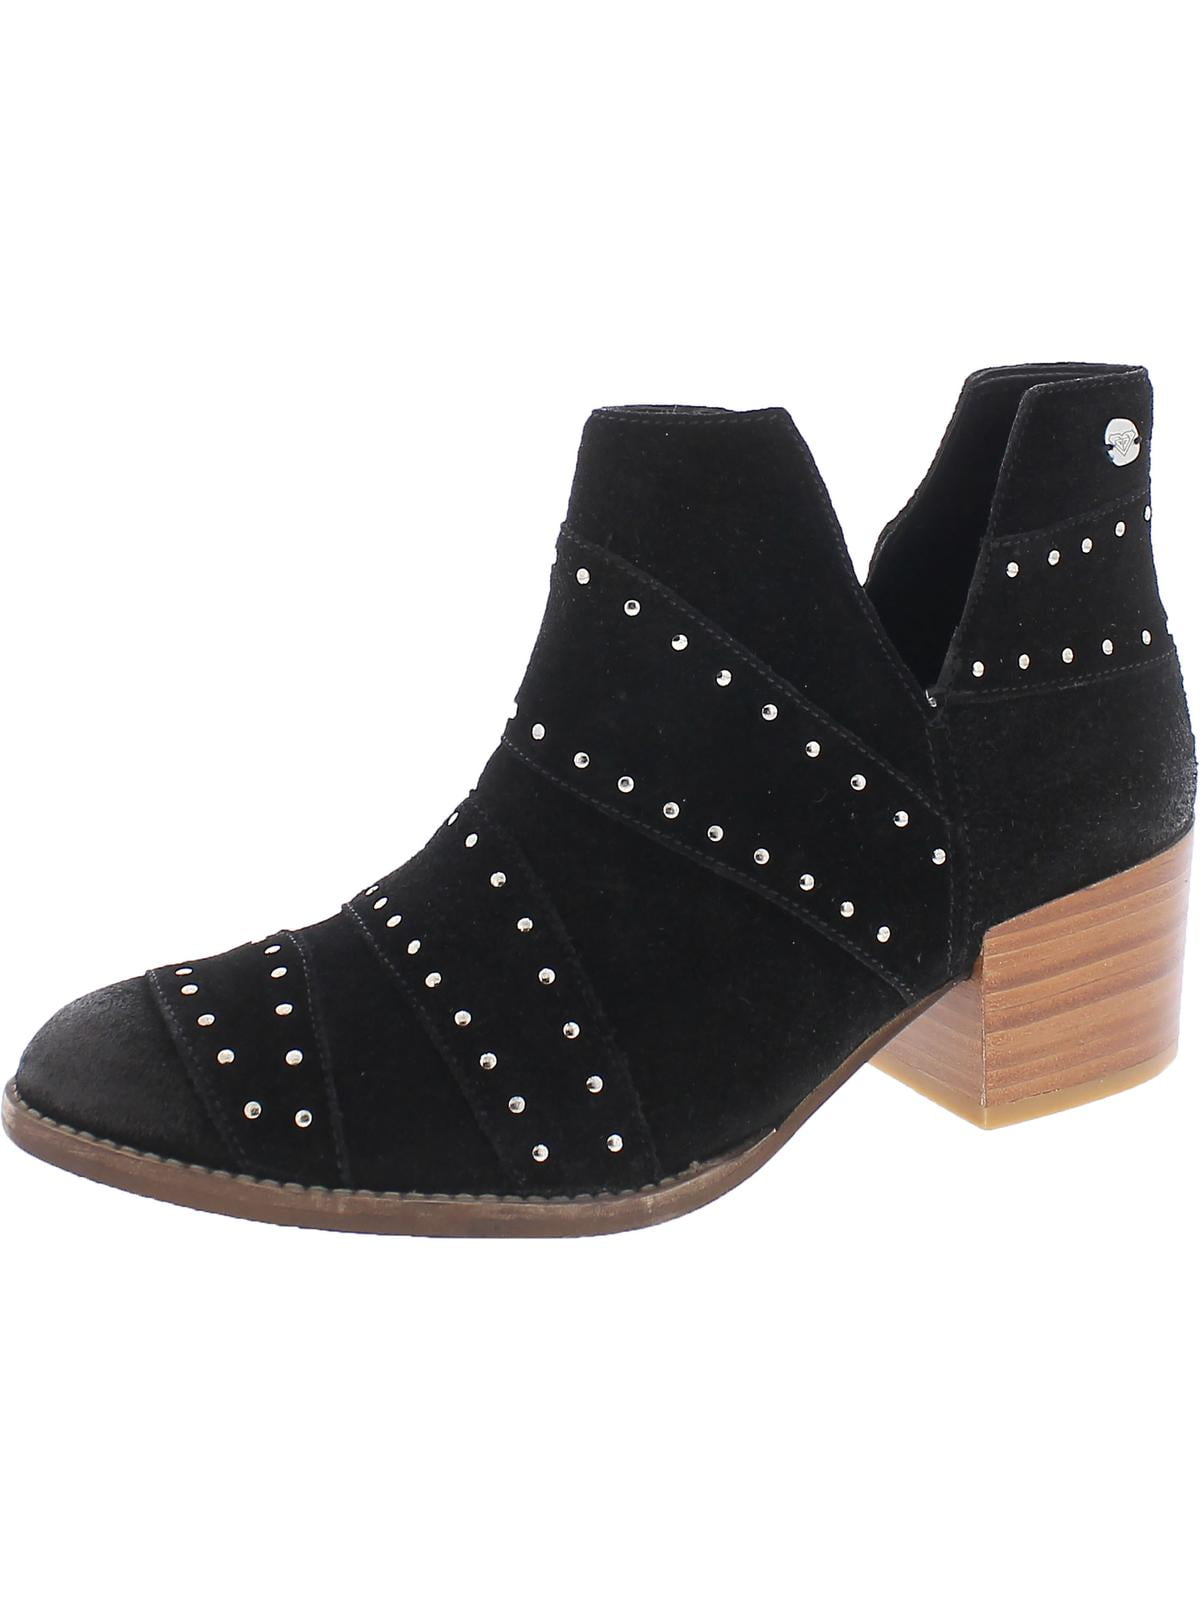 Roxy Womens Lexie Suede Fashion Boot Ankle